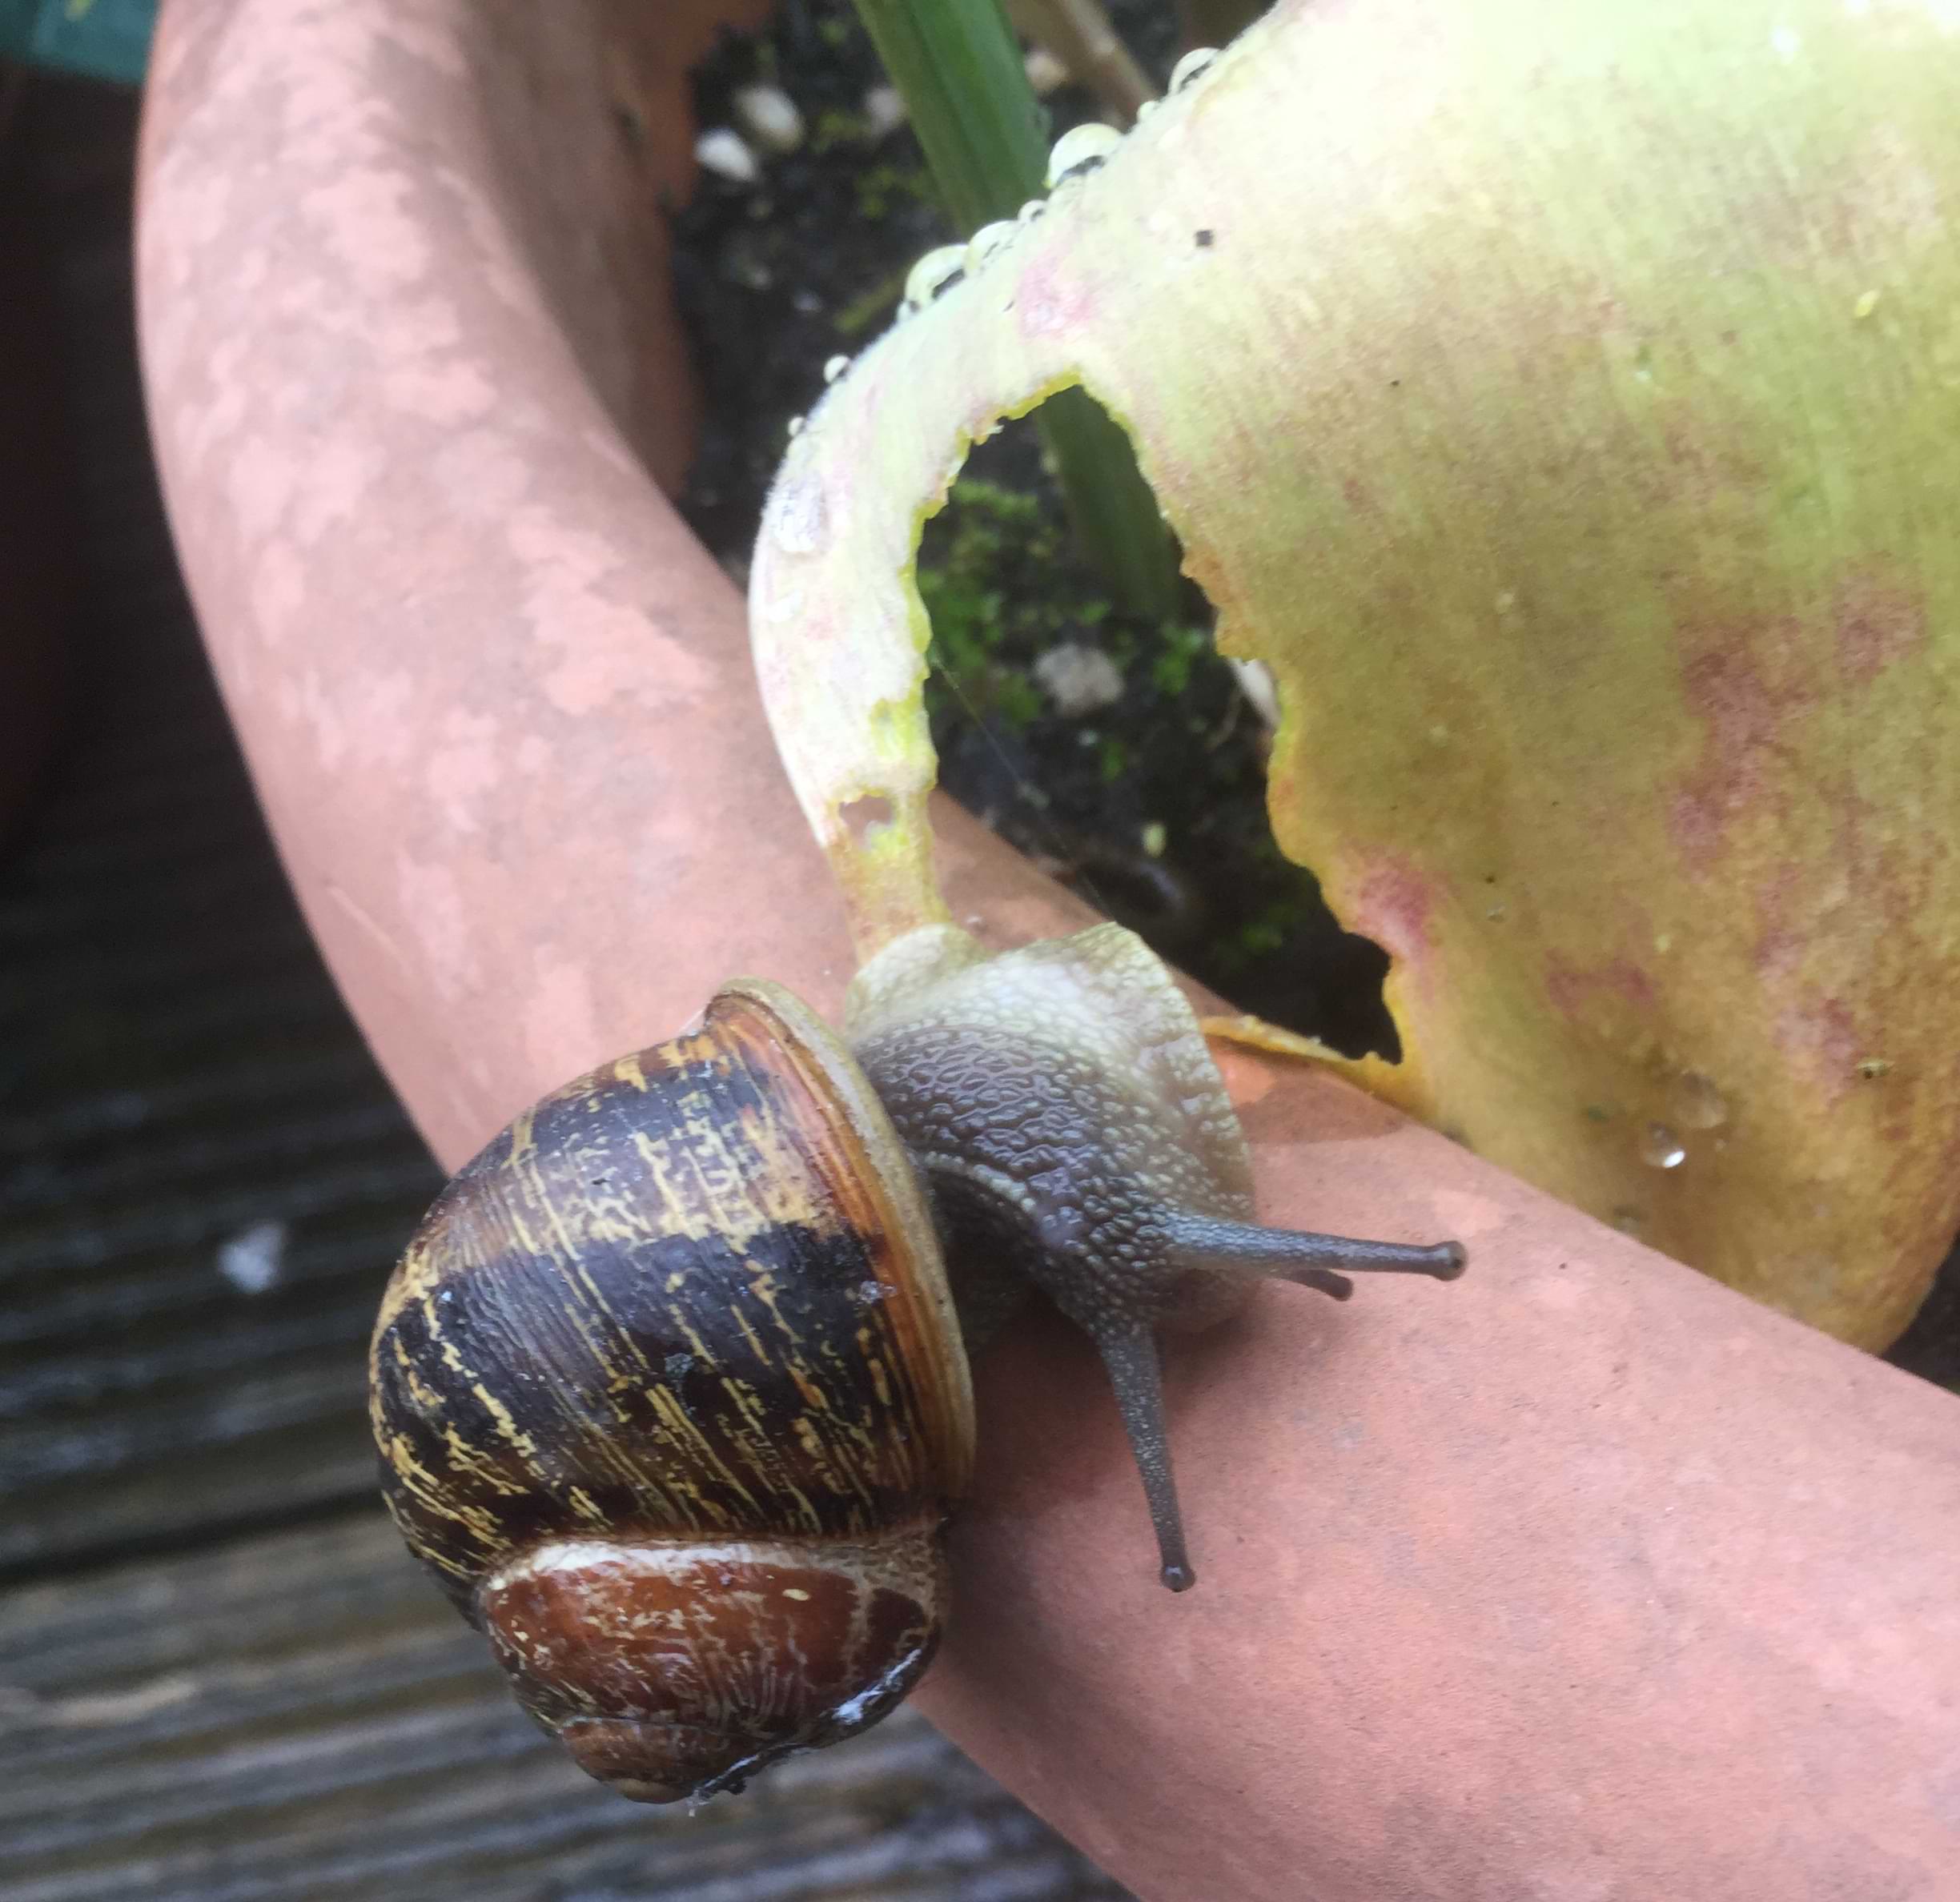 A common garden snail sitting on the edge of a plant pot. In the background you can see the leaf the snail has been eating. There is a large chunk missing on the left side.